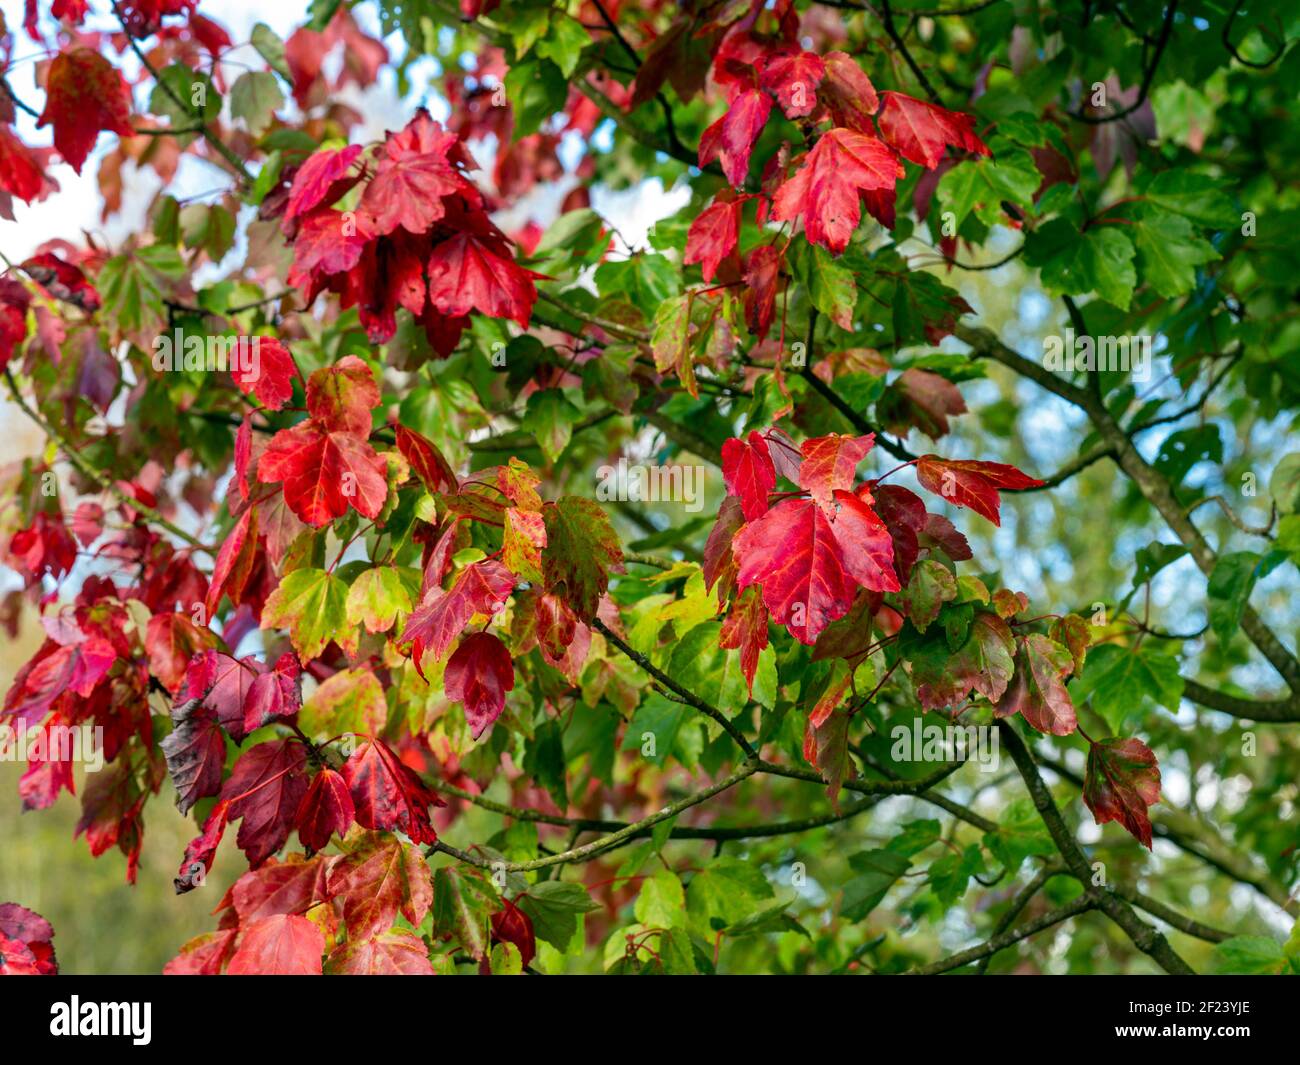 Colourful red and green Acer maple leaves on a tree in autumn Stock Photo